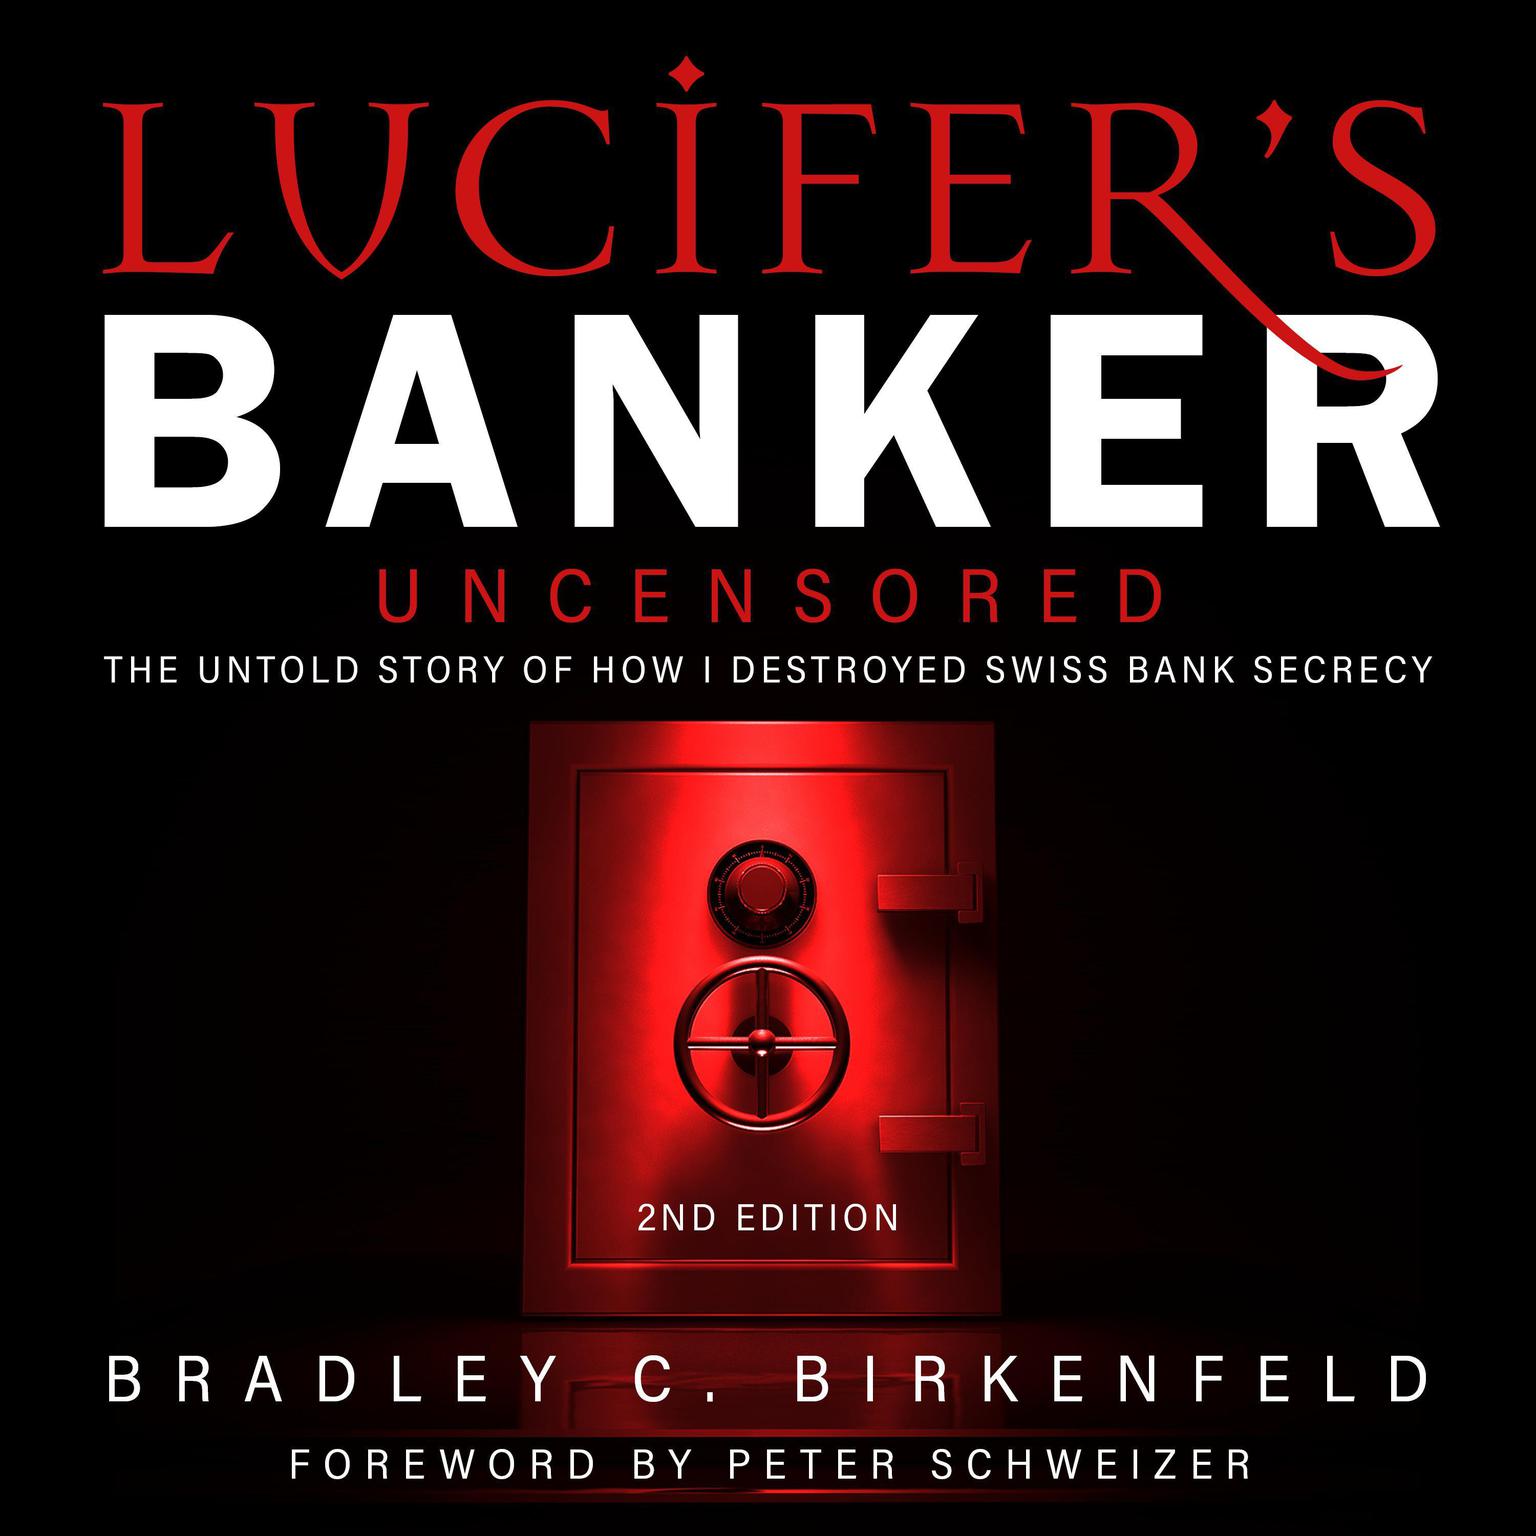 Lucifer’s Banker Uncensored: The Untold Story of How I Destroyed Swiss Bank Secrecy, 2nd Edition Audiobook, by Bradley C. Birkenfeld